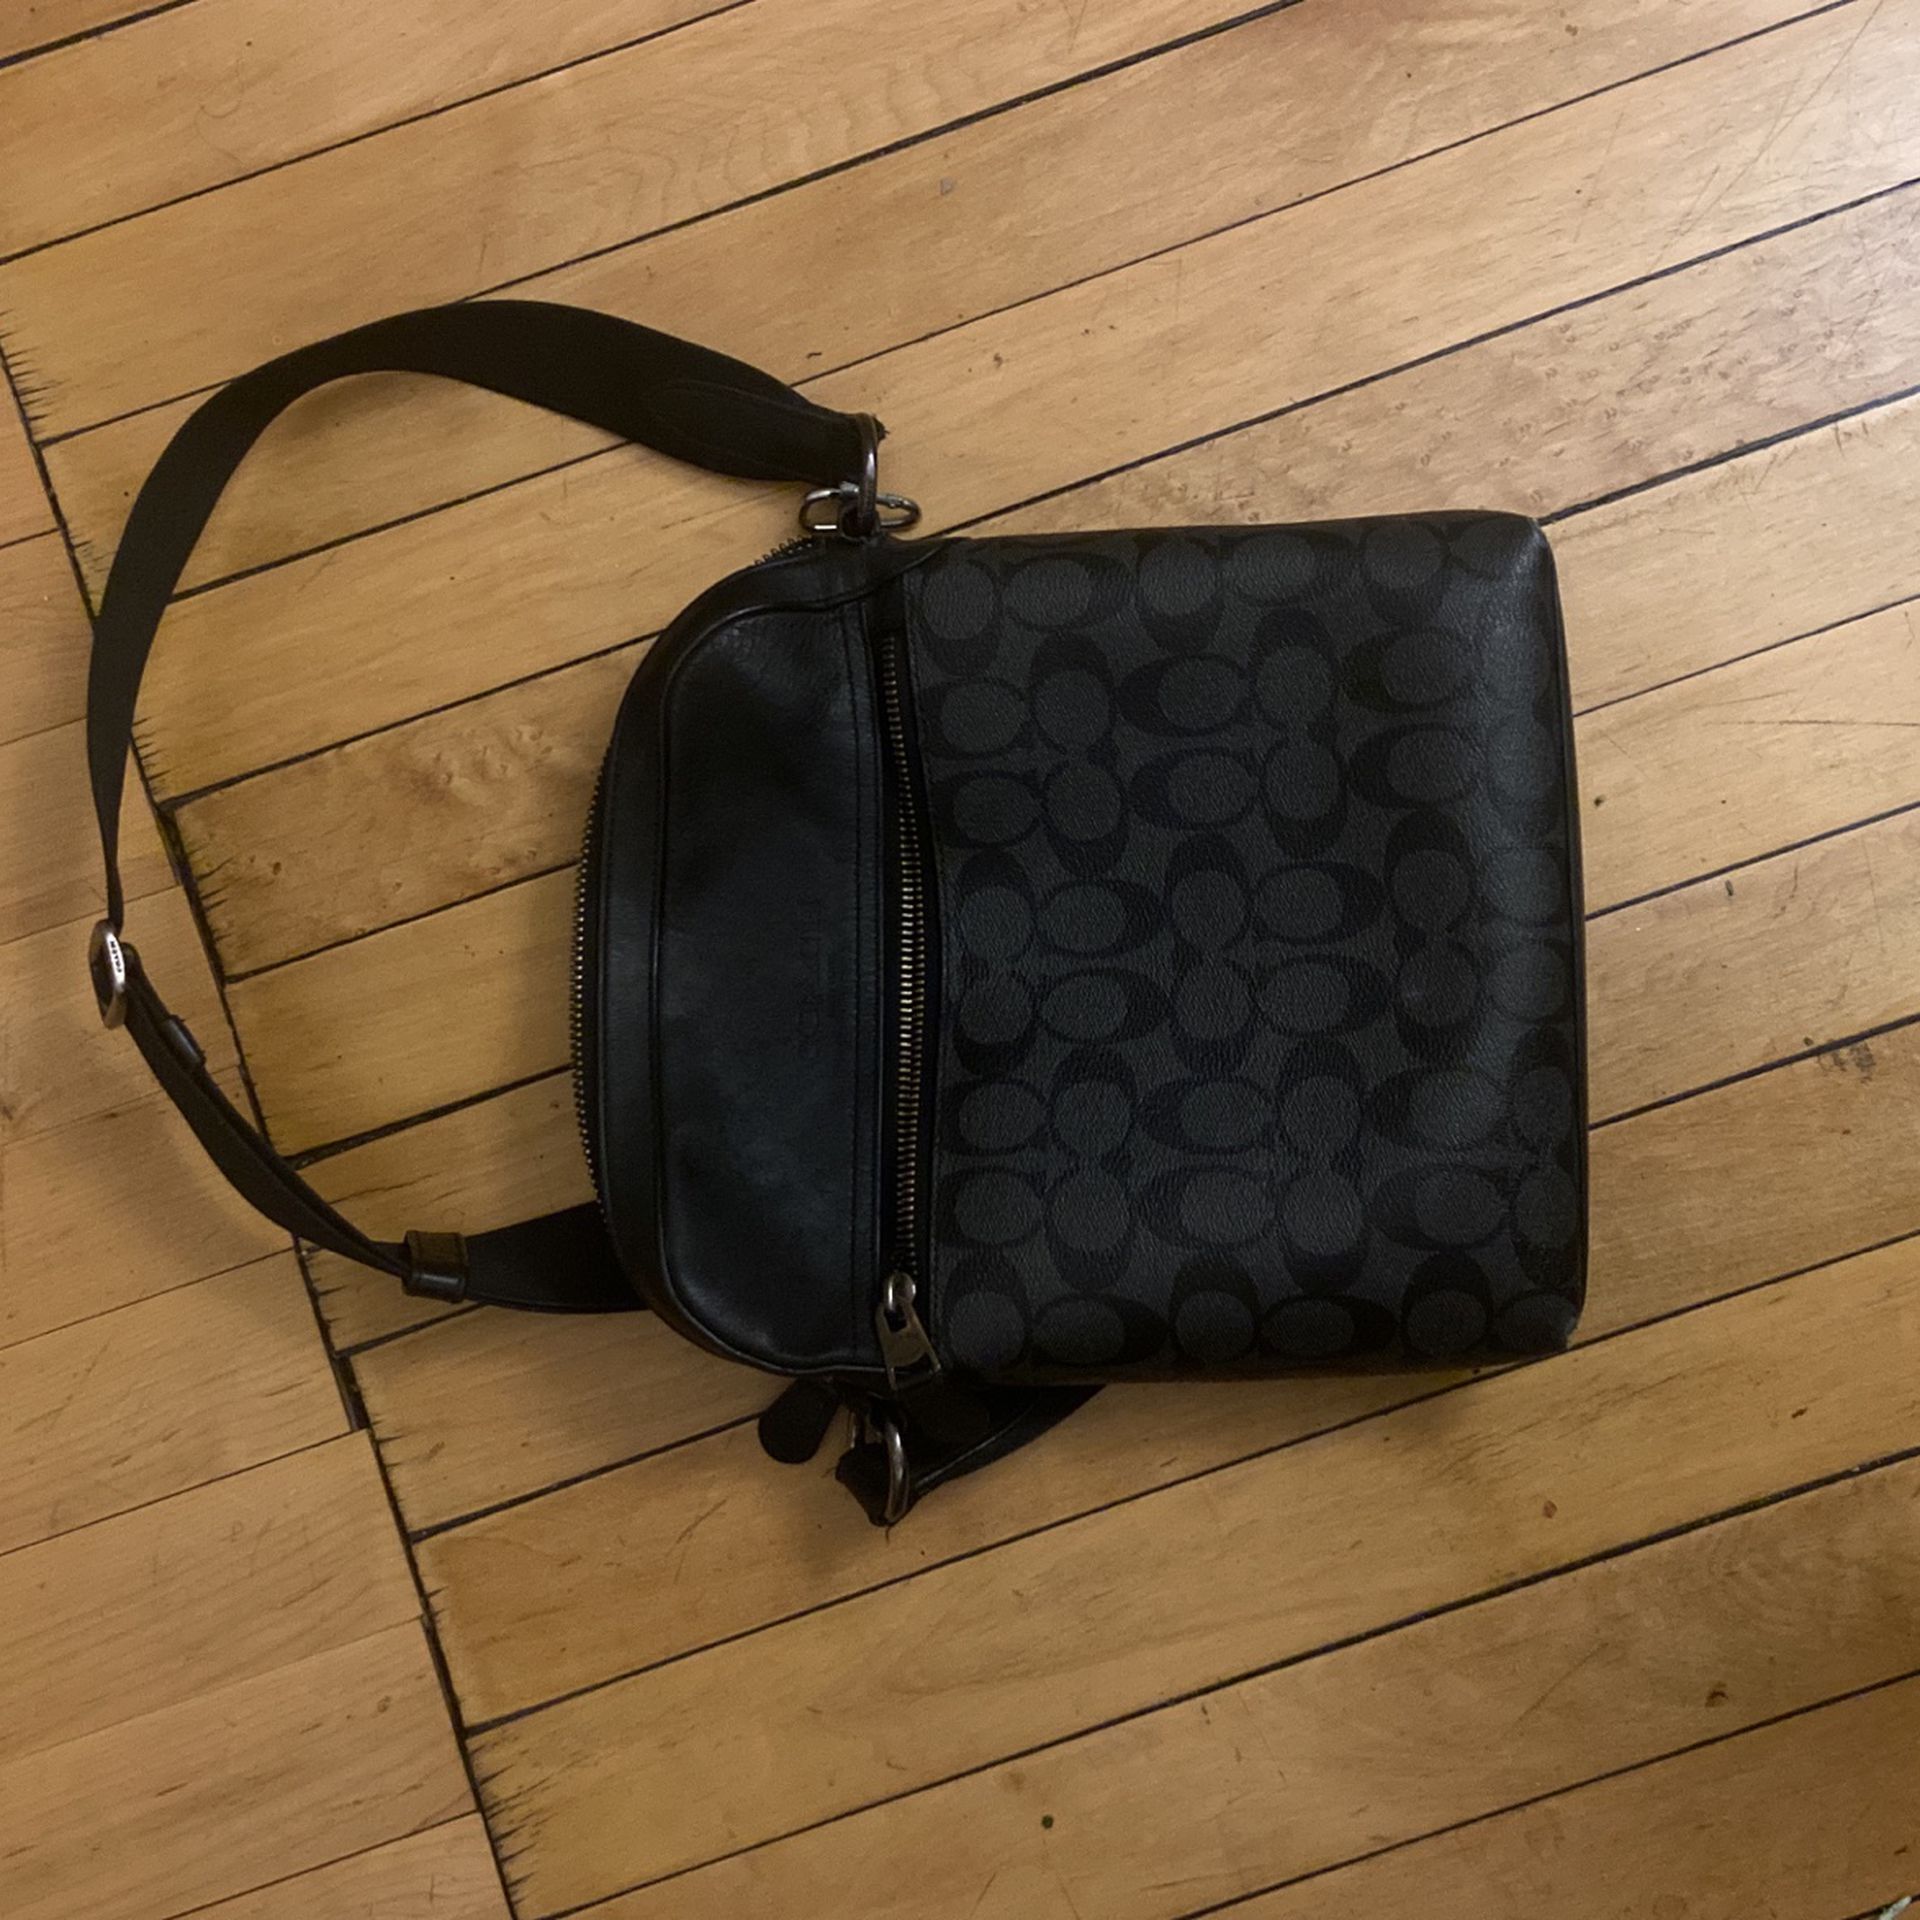 Coach Messenger Bag for Sale in Overland, MO - OfferUp